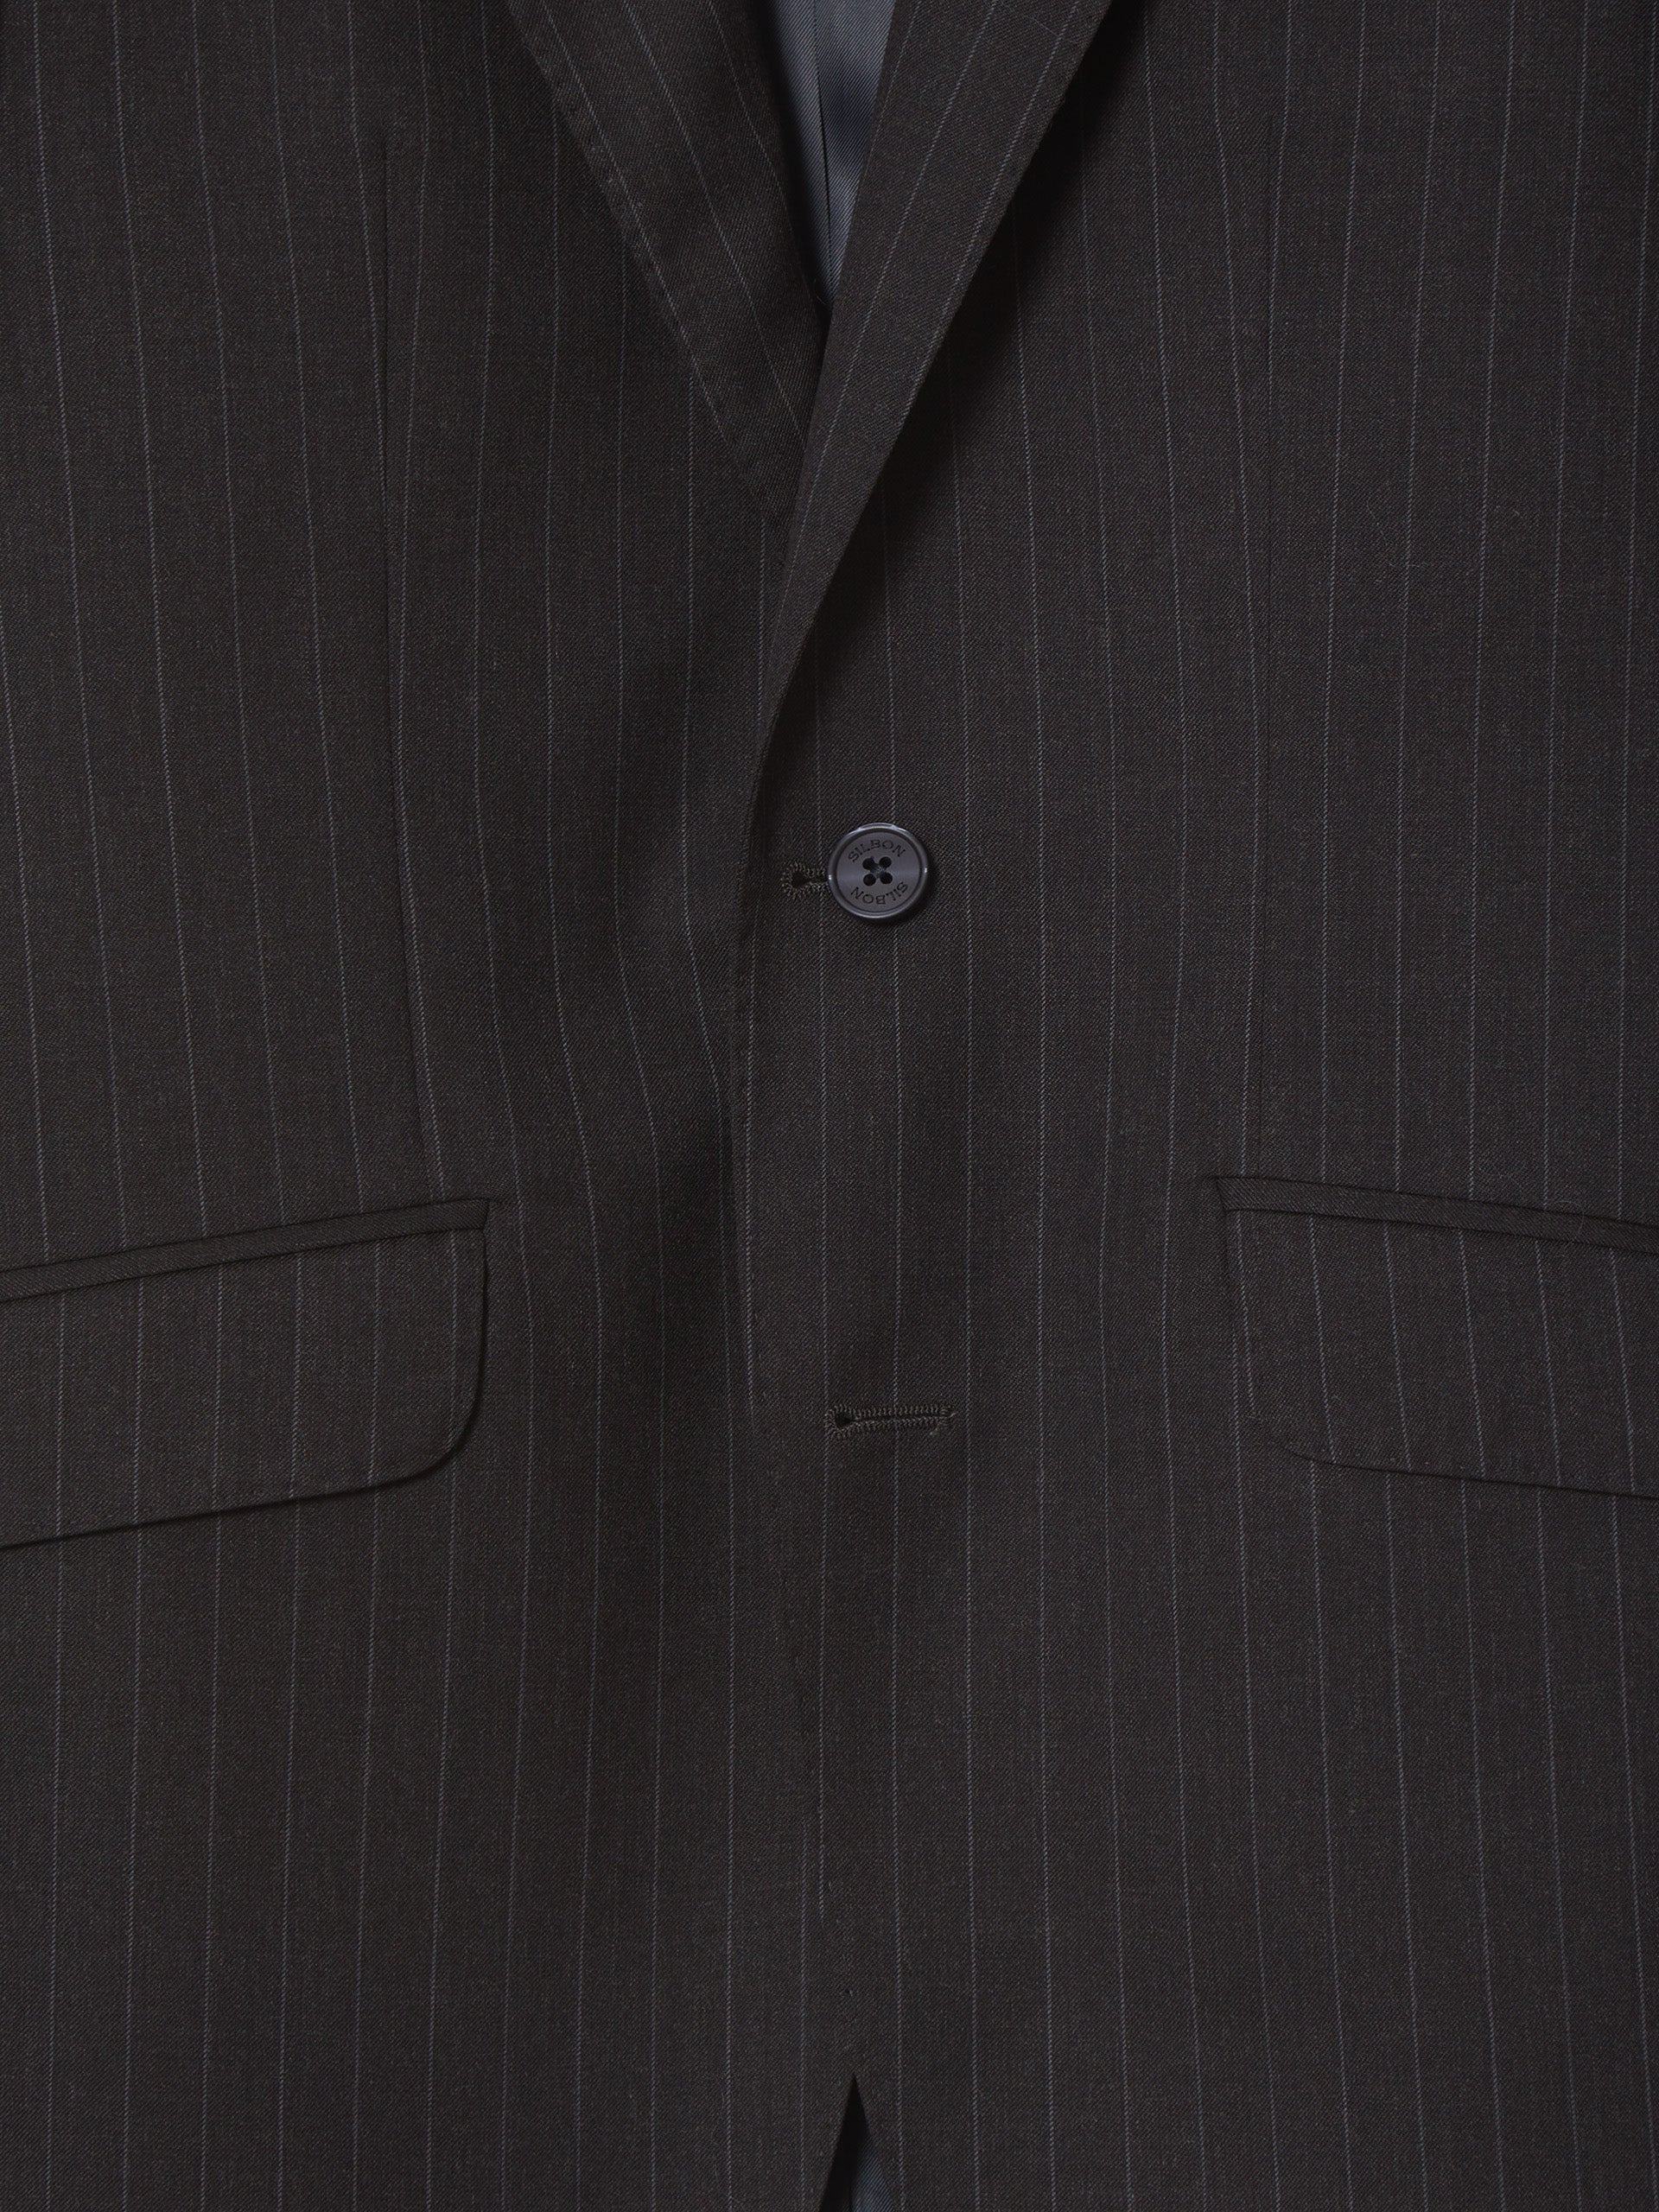 Classic gray diplomatic suit jacket